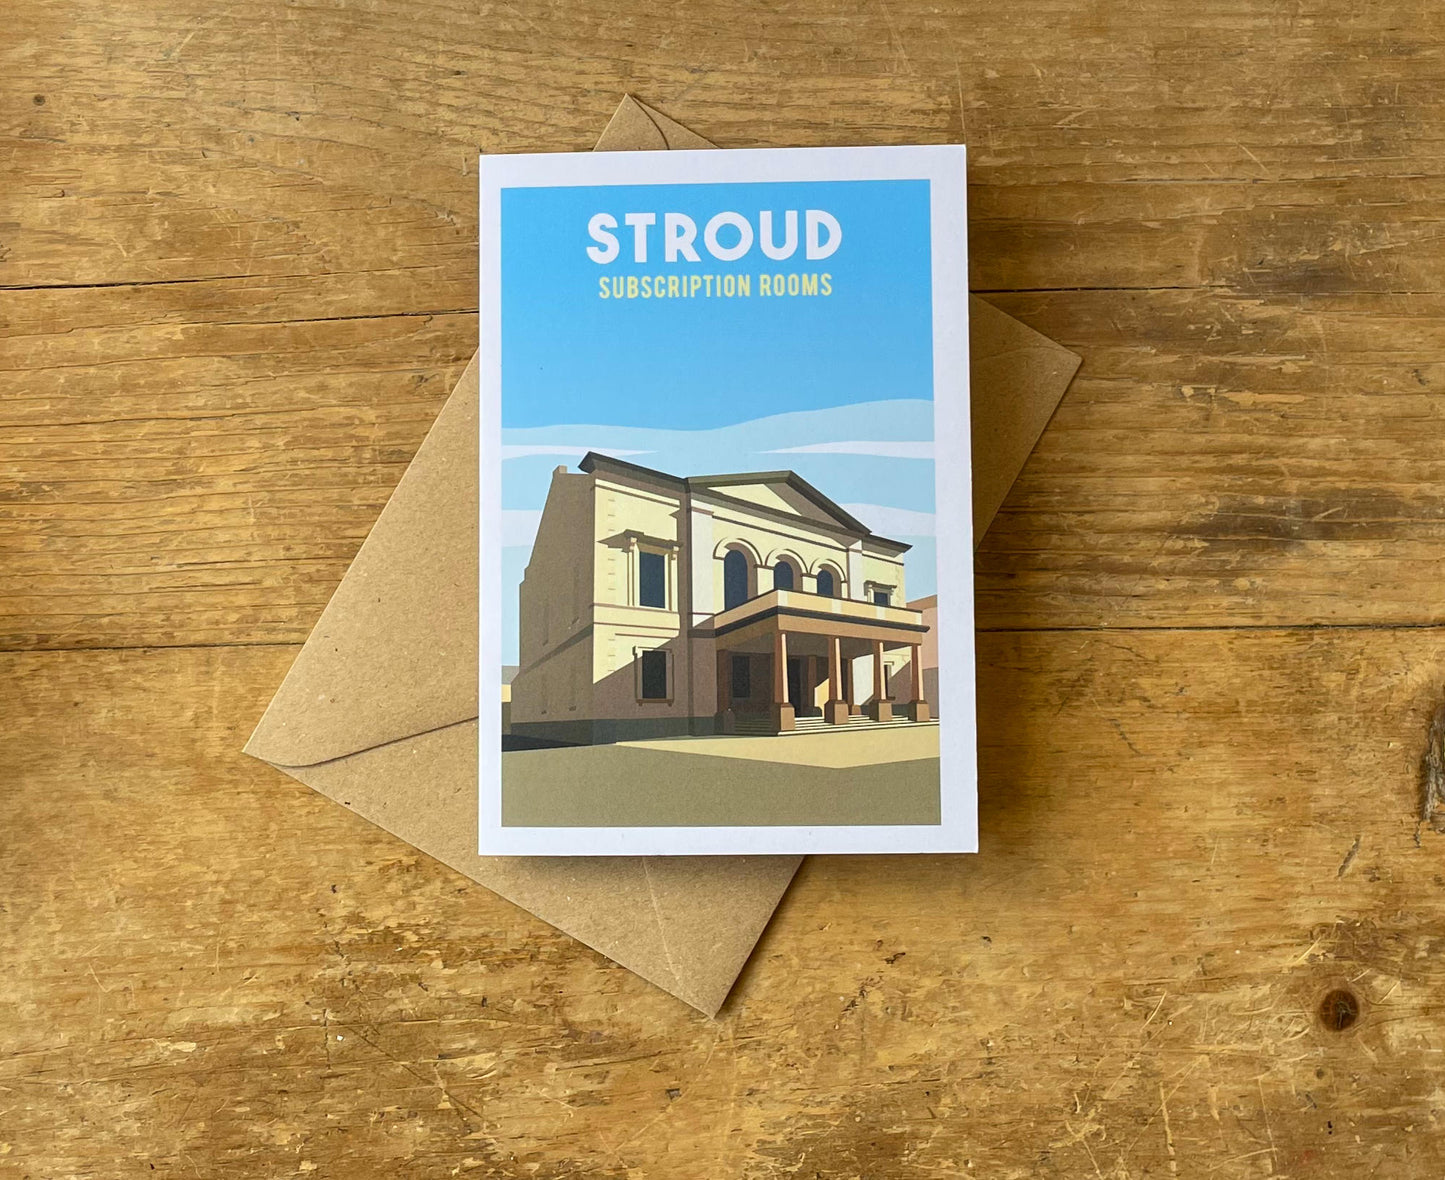 Stroud Subscription Rooms Greeting Card on desk